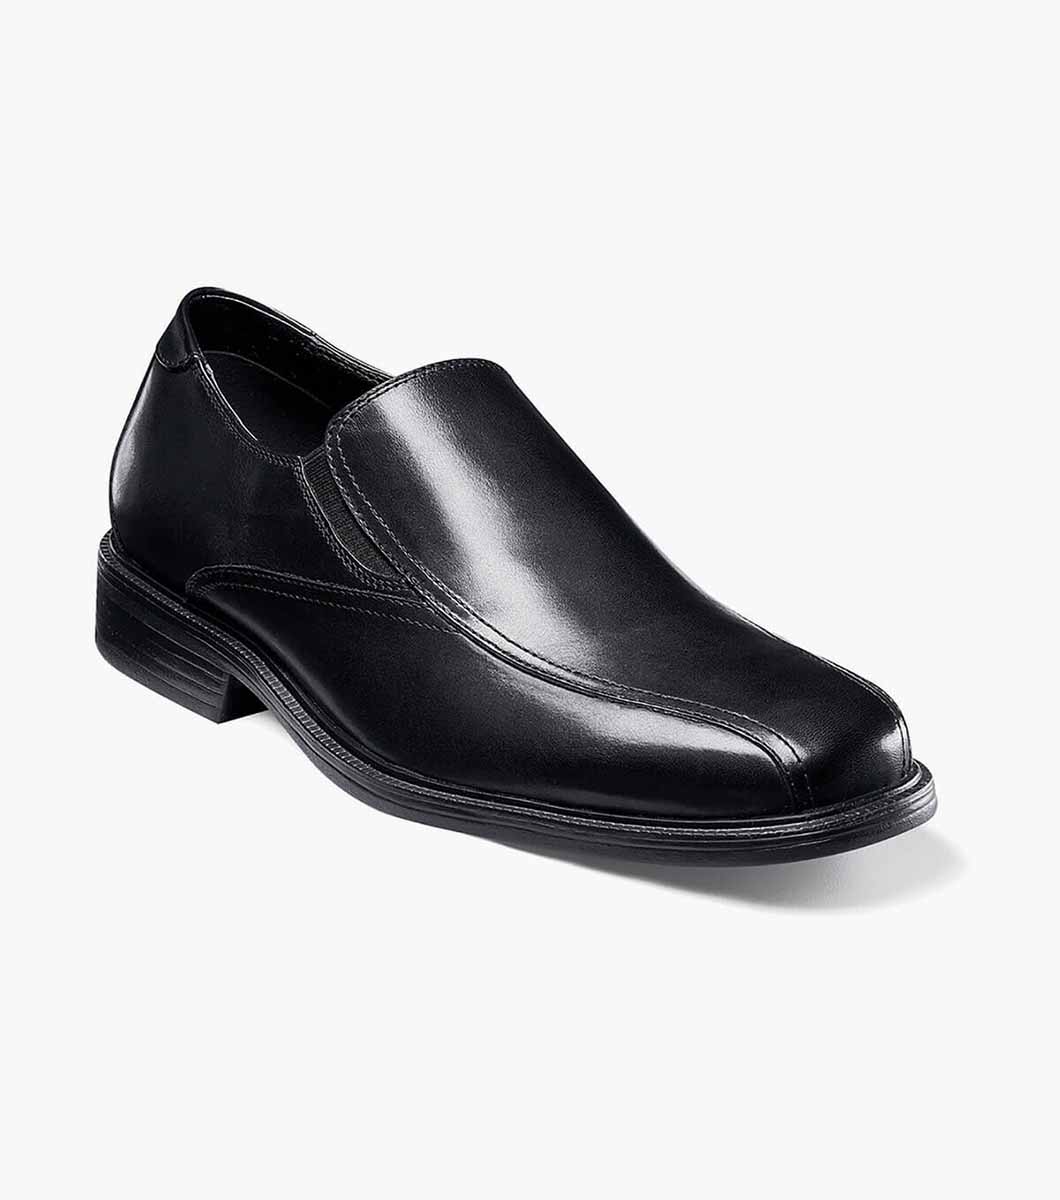 florsheim shoes black and white